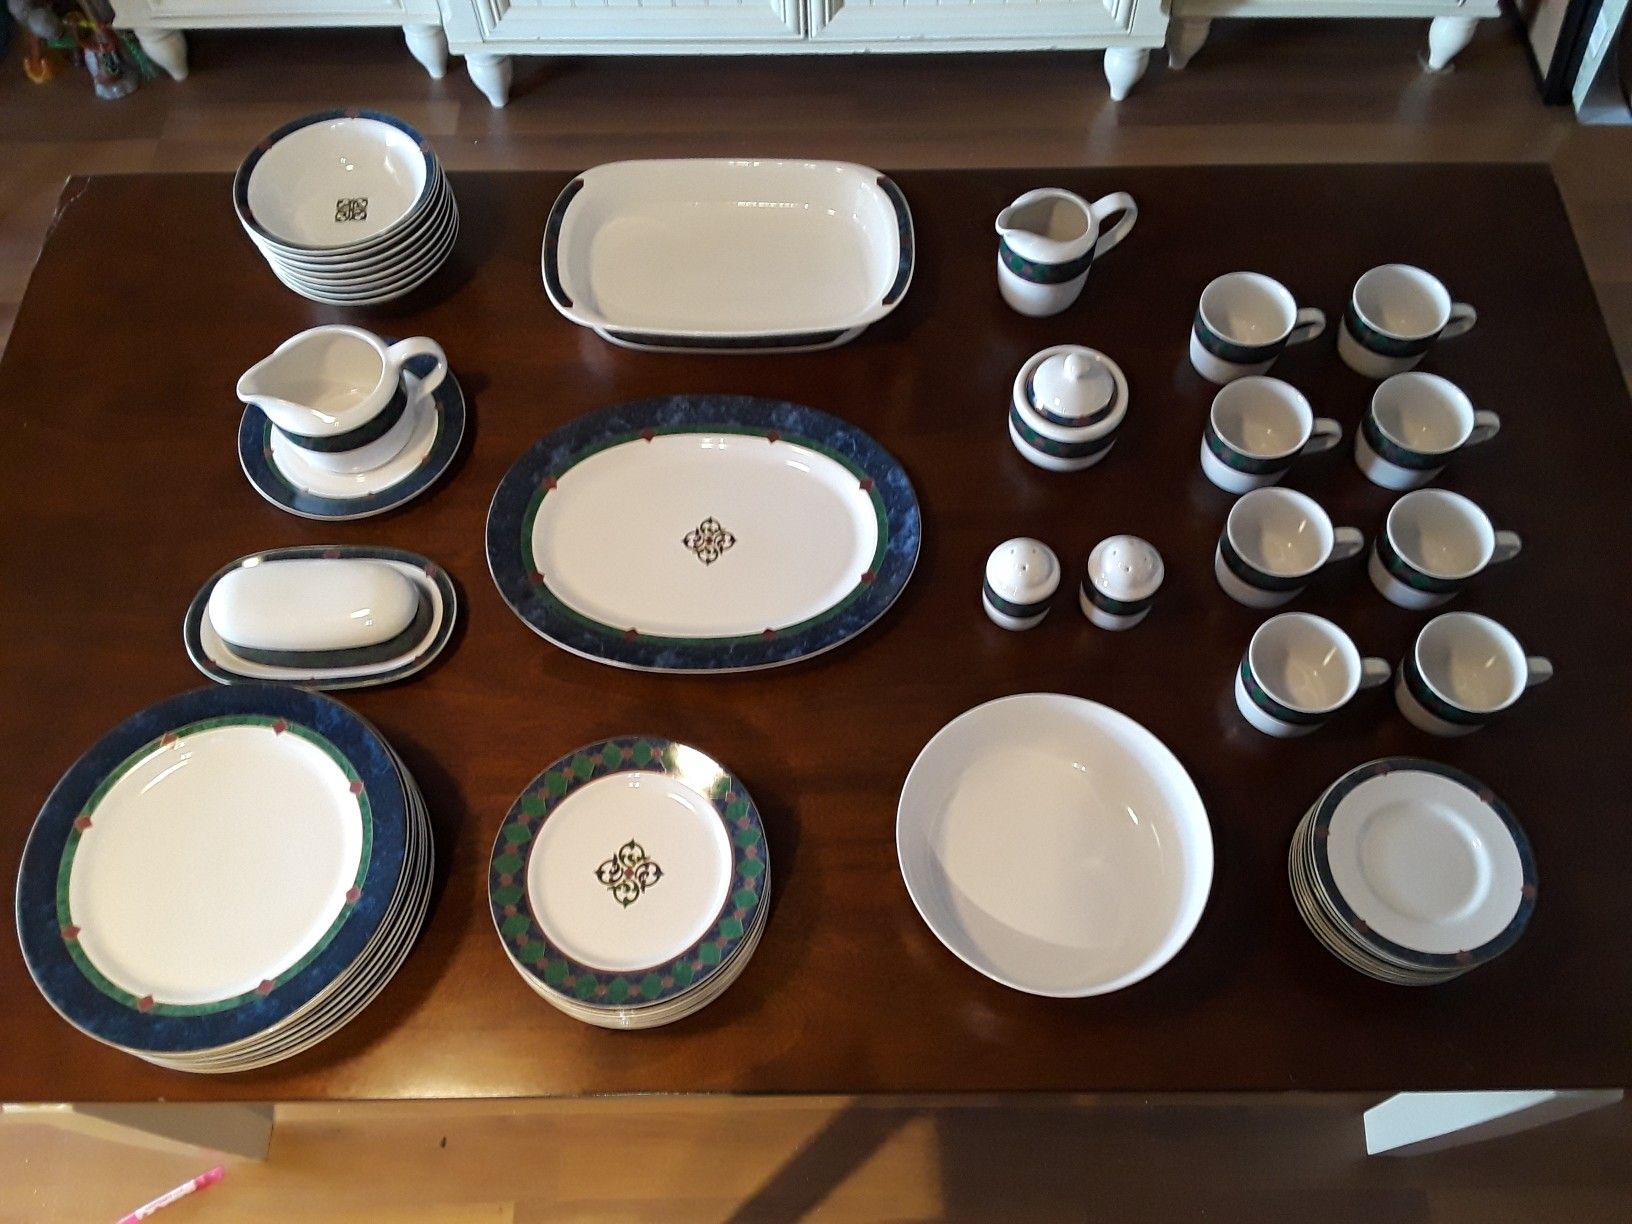 PFALTZGRAFF "Amalfi Classic" Complete Dinnerware (52) Piece Set (Service For 8) Like Brand New REDUCED FOR QUICK SALE!!